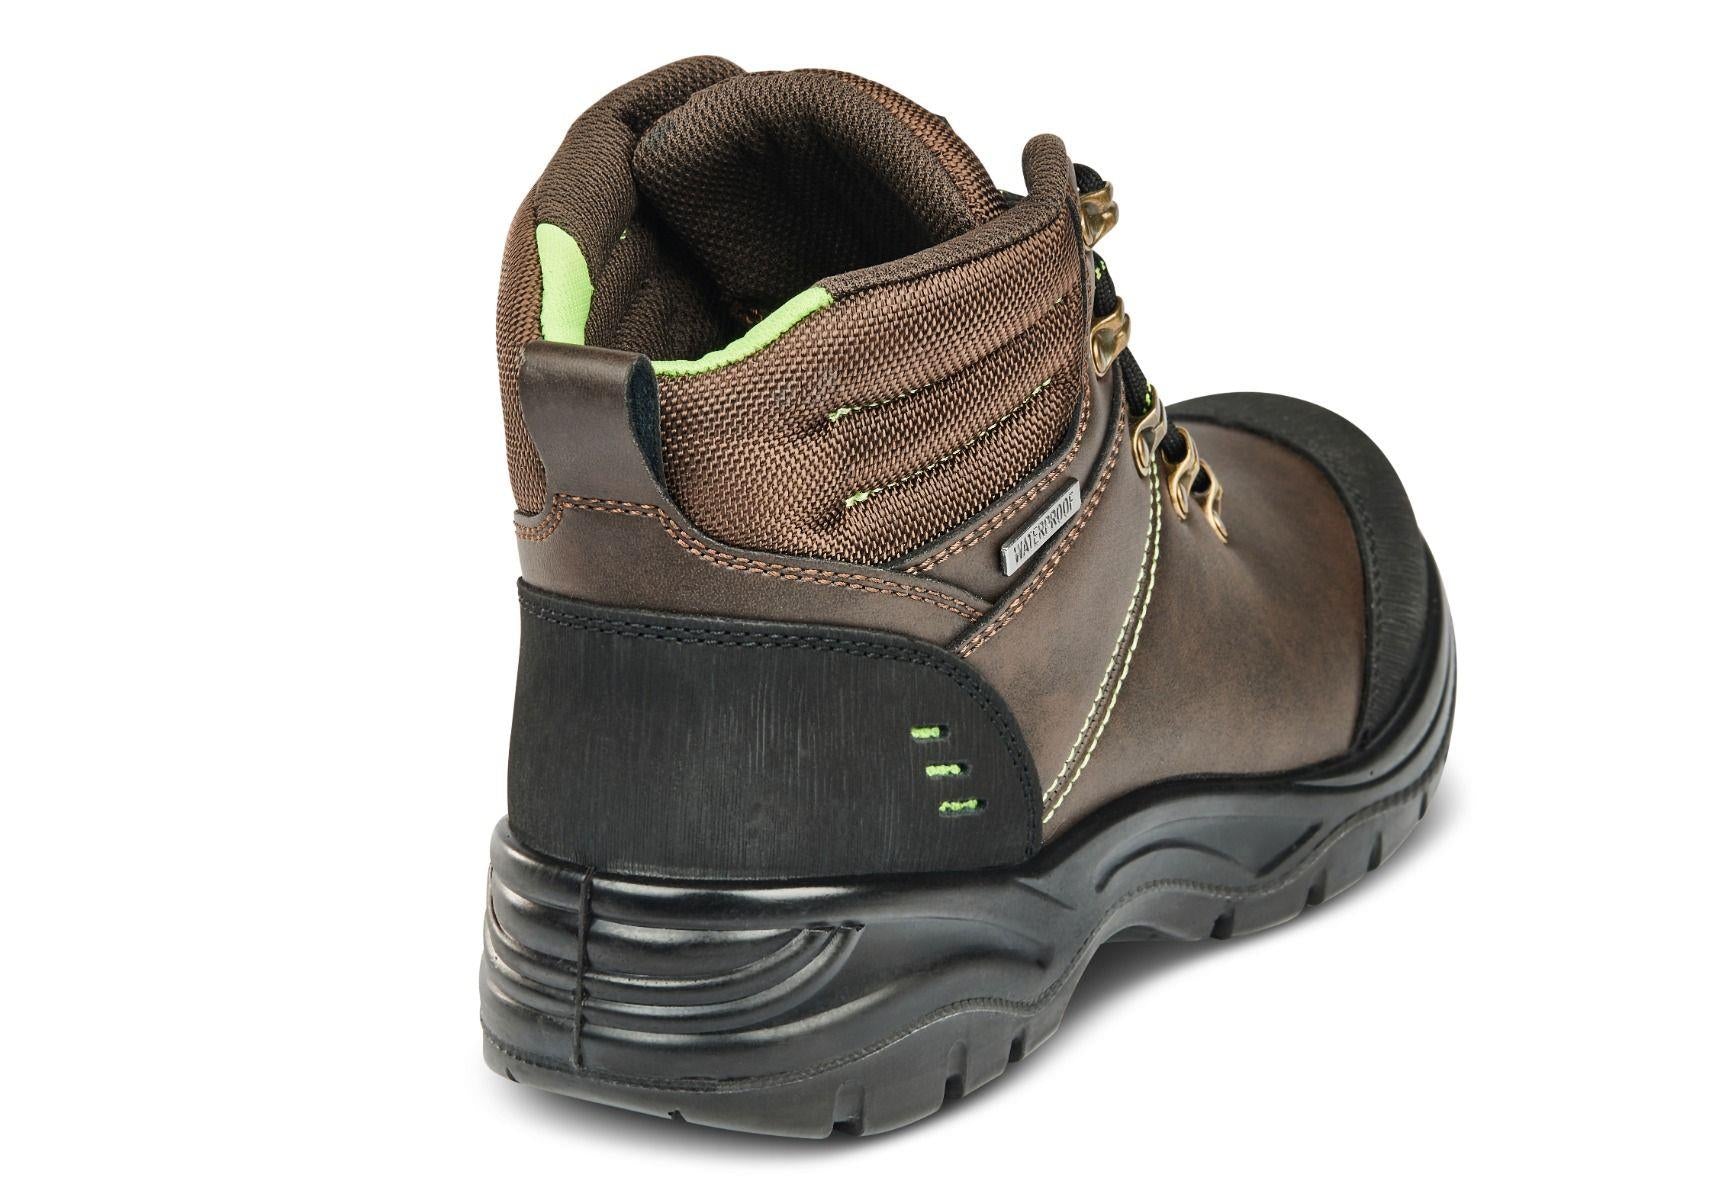 Apache Saturn S3 brown waterproof composite toe/midsole work safety boots